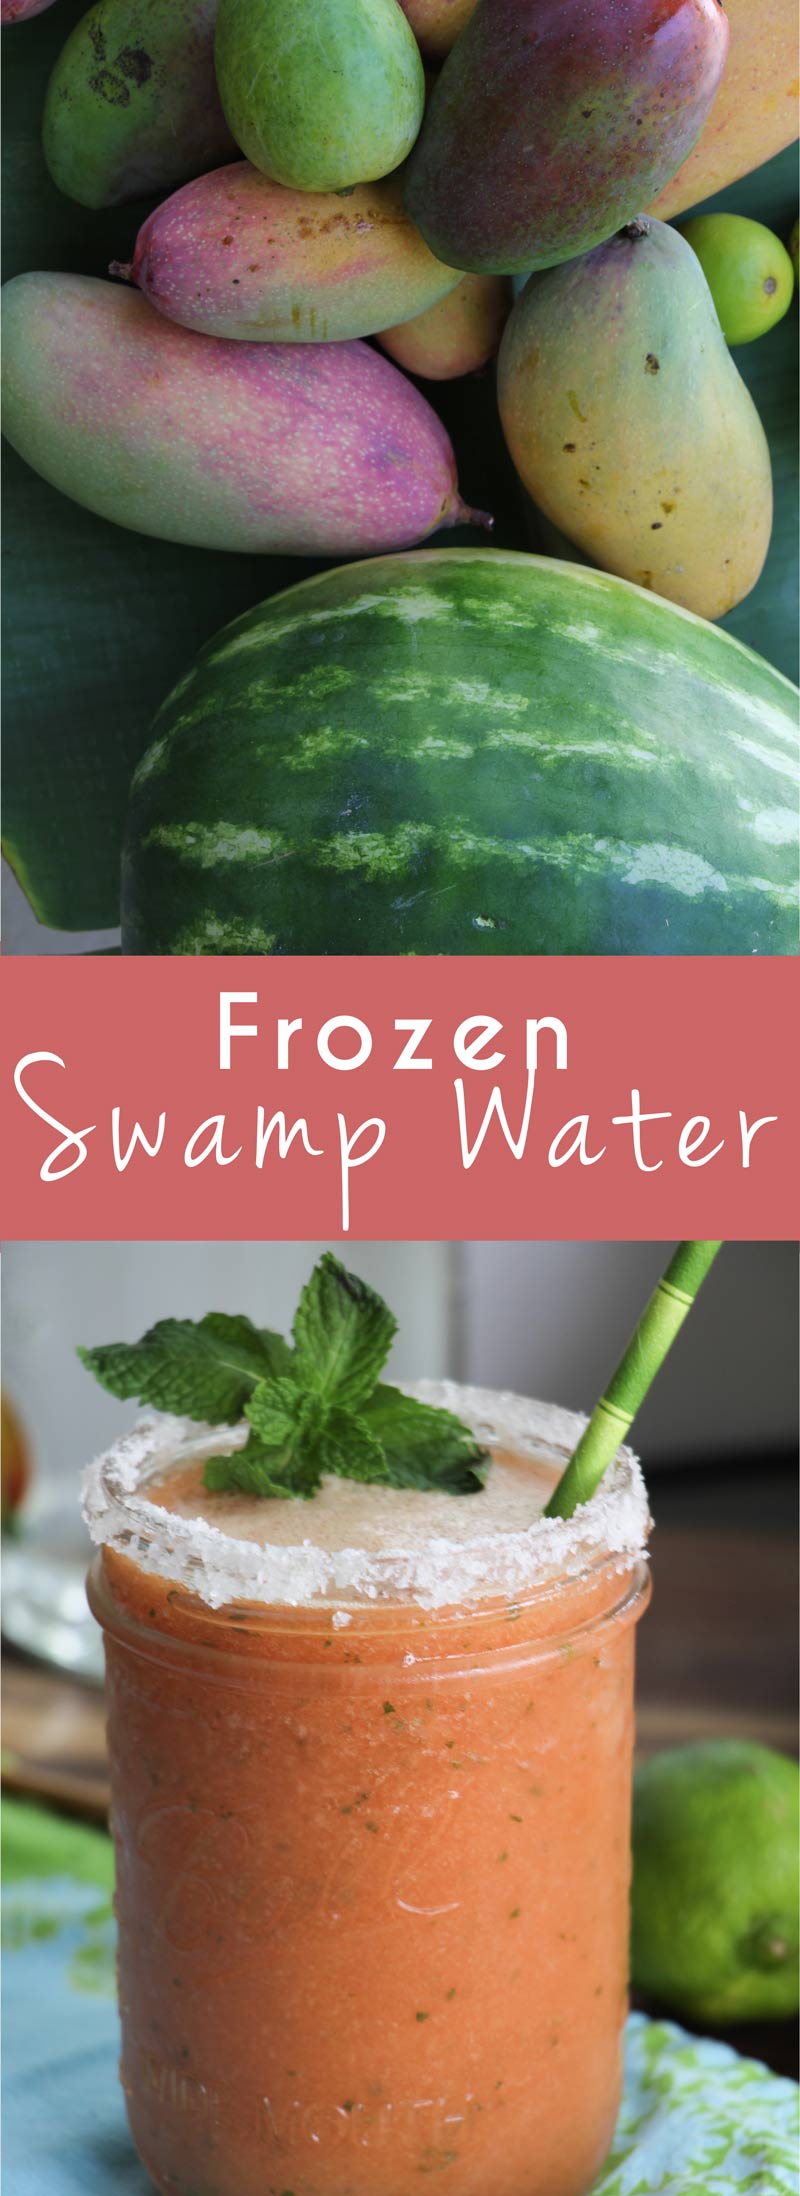 Frozen Swamp Water- a margarita slushy with watermelon, mango, and mint, served up in a salted mason jar